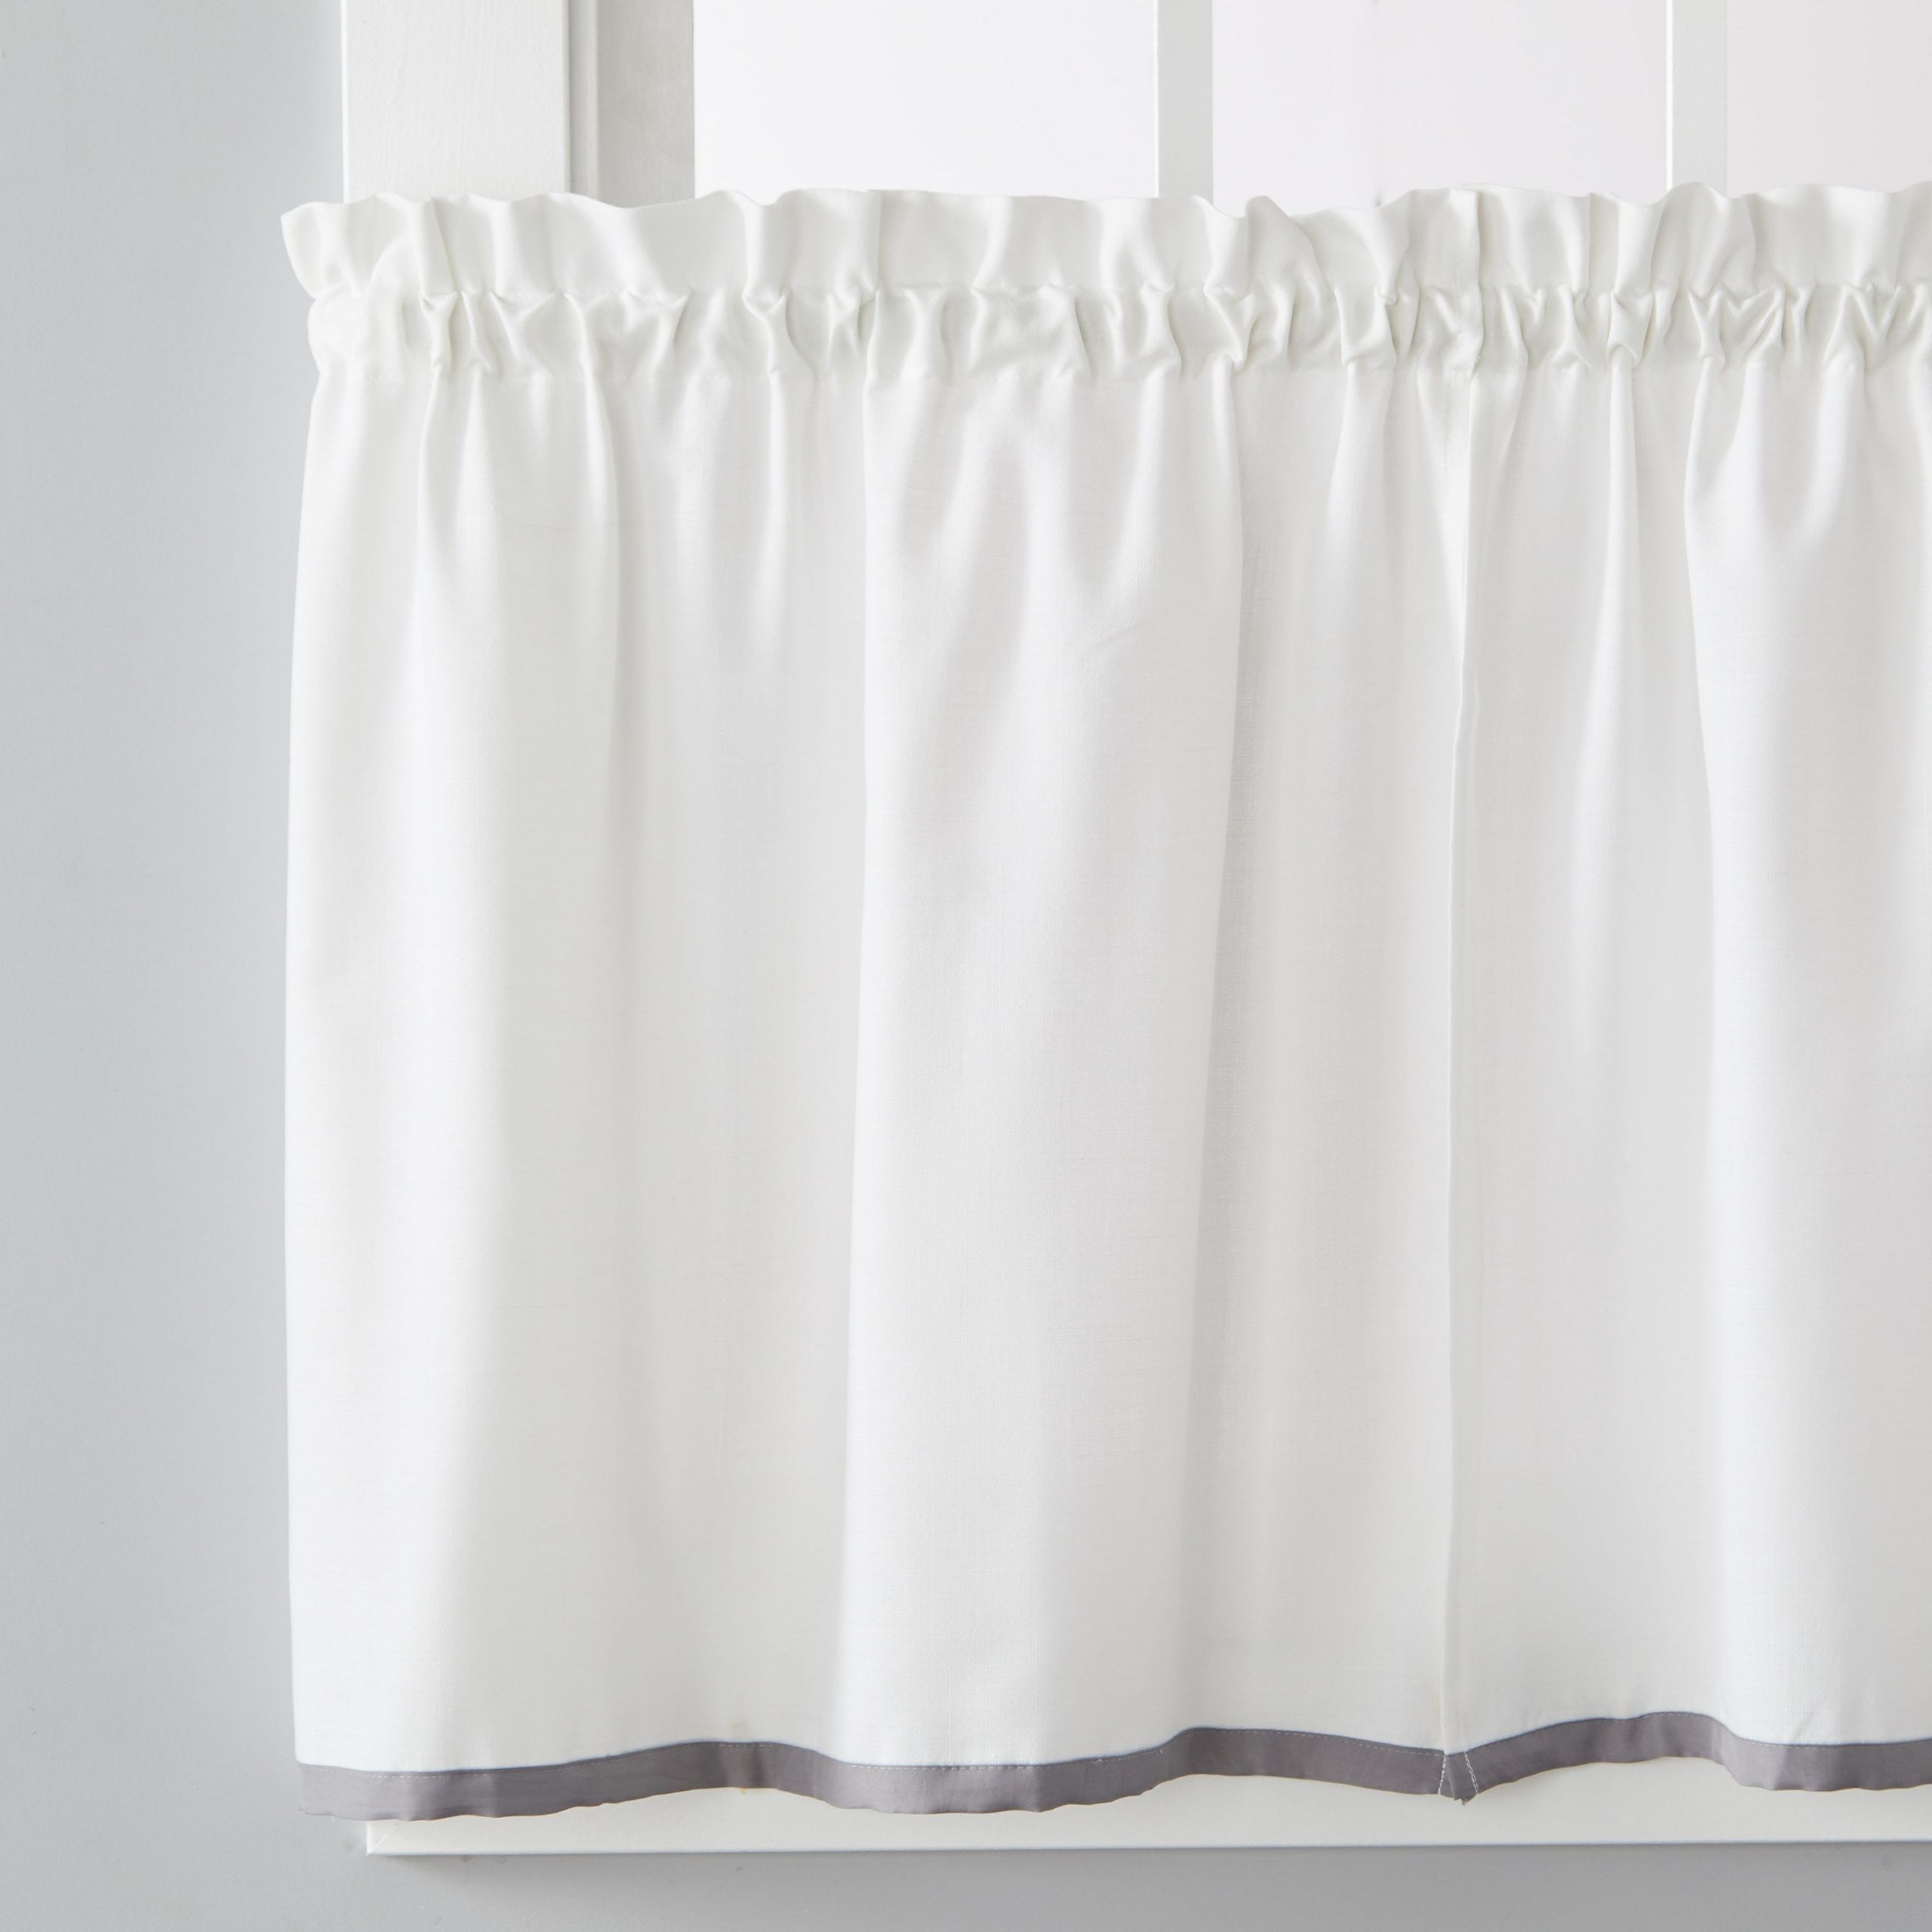 Skl Home Manor 24 Inch Tier Pair In Dove Gray Throughout Dove Gray Curtain Tier Pairs (Photo 4 of 20)